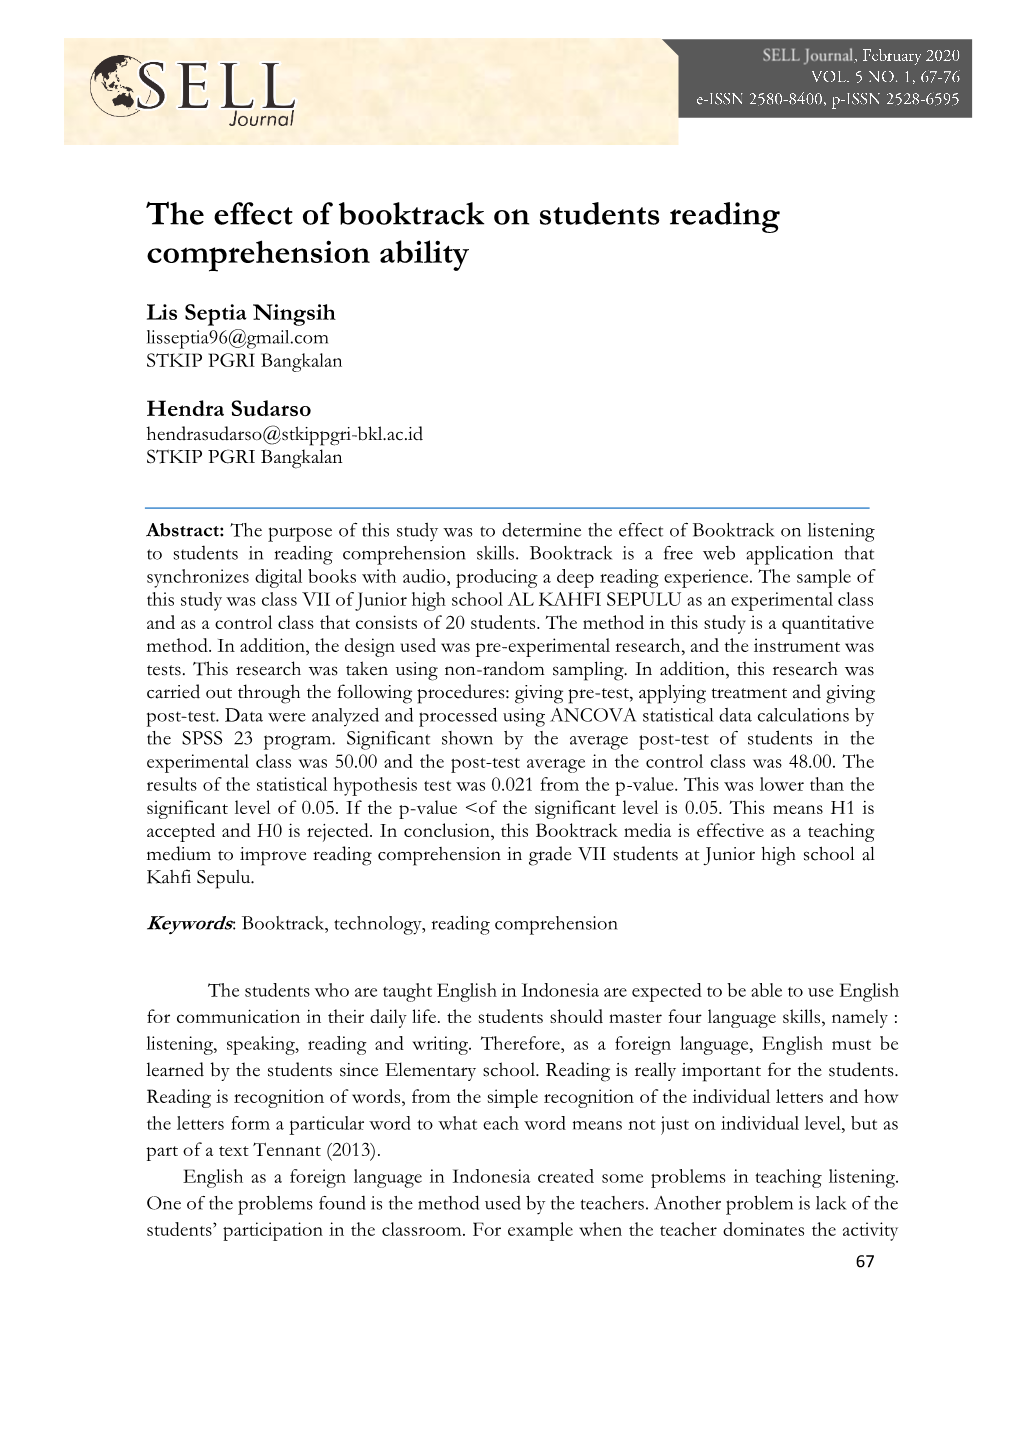 The Effect of Booktrack on Students Reading Comprehension Ability